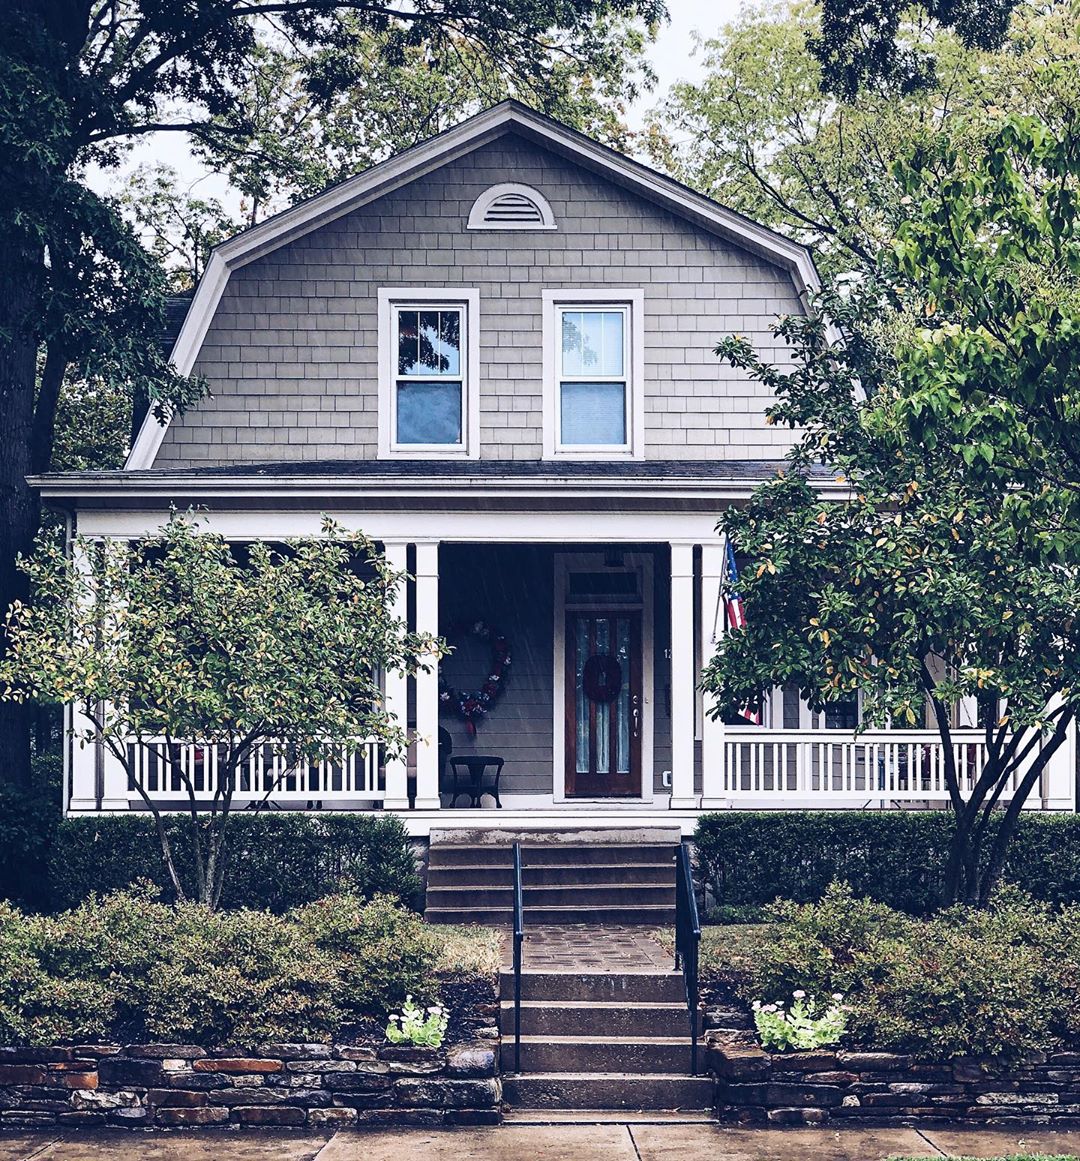 Two-story gray house with white pillars. Photo by Instagram user @occasionally.in.ohio